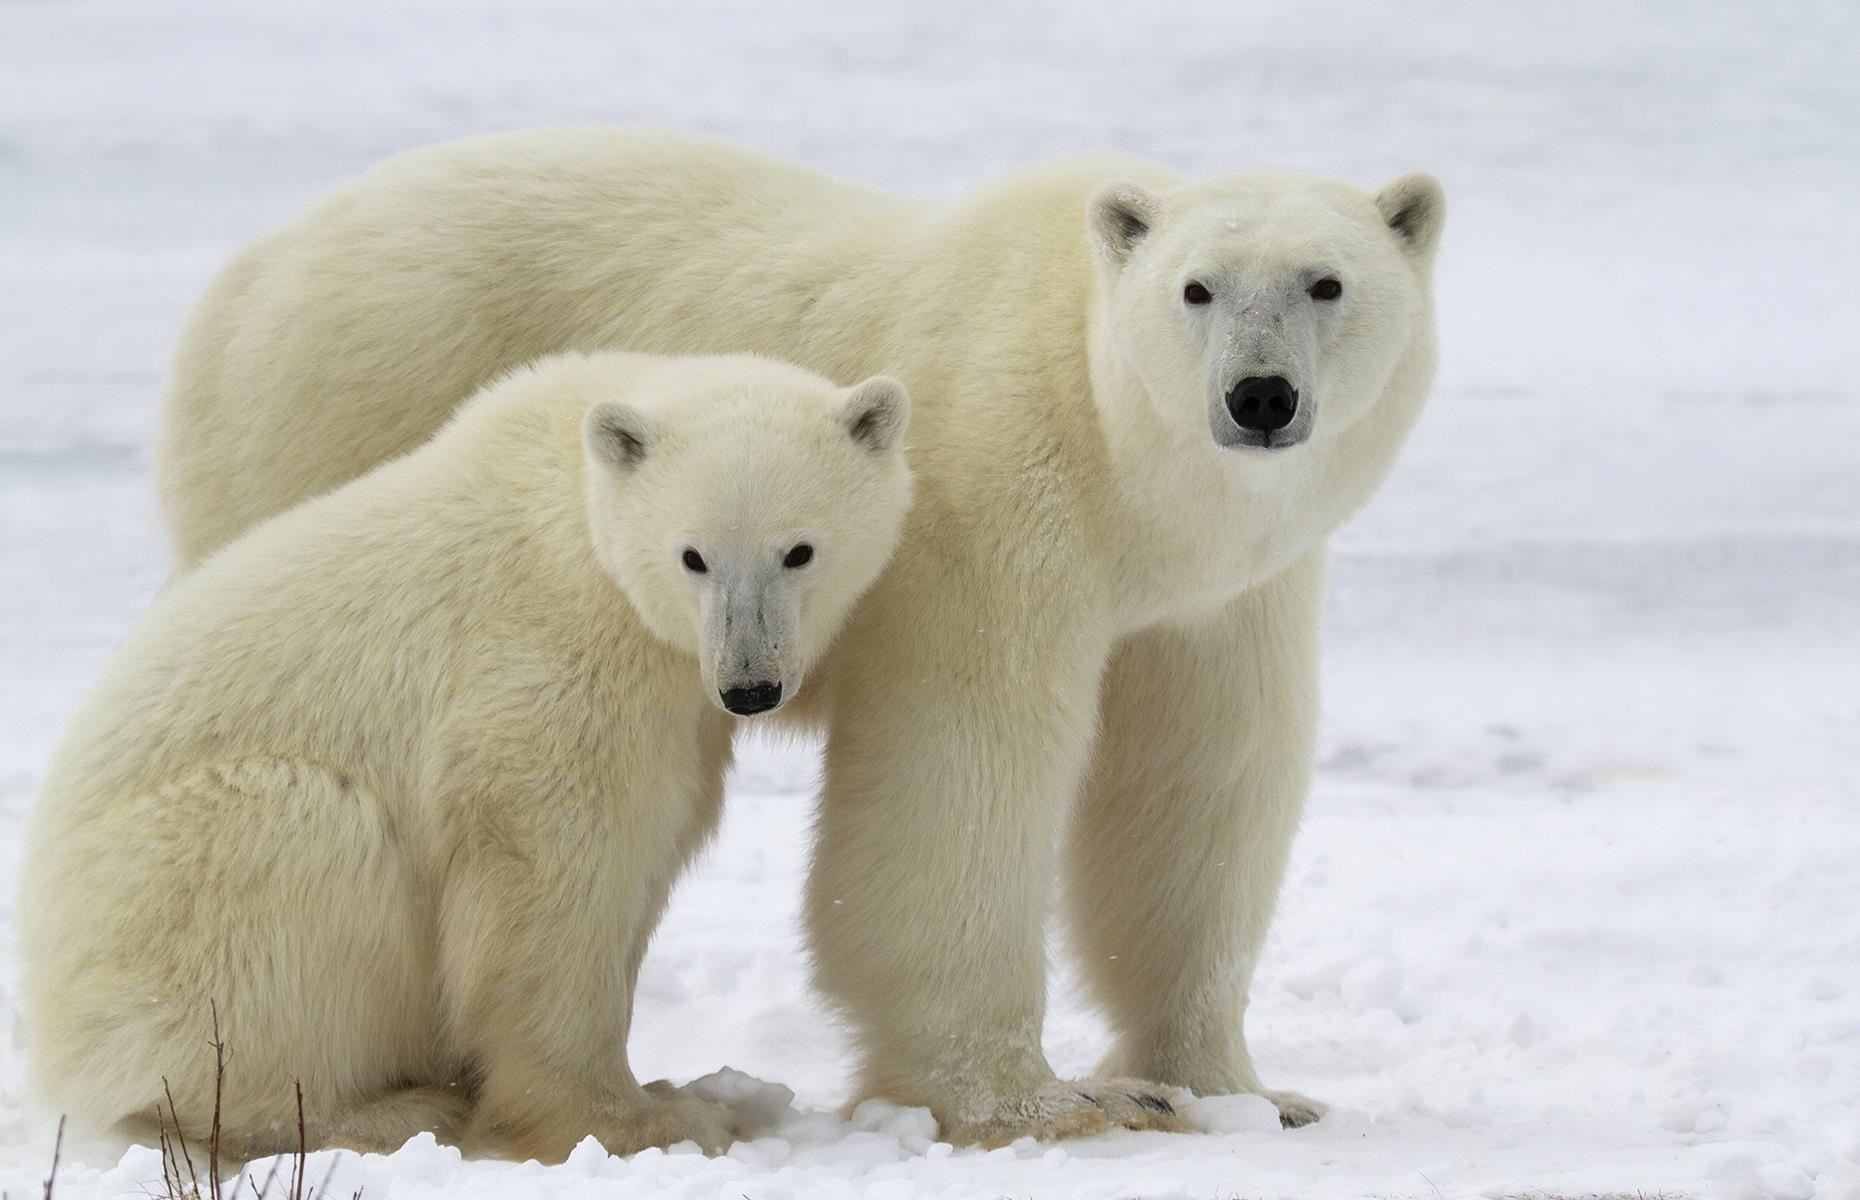 <p>Whether you're on an Arctic cruise or a trip to the self-proclaimed polar bear capital of the world, also known as Churchill in Manitoba, Canada, don't miss the chance to catch sight of these majestic creatures as they climb icebergs, search for food or cuddle up in the snow. </p>  <p><a href="https://www.loveexploring.com/galleries/137712/best-new-cruise-destinations?page=1"><strong>The world's newest cruise destinations</strong></a></p>